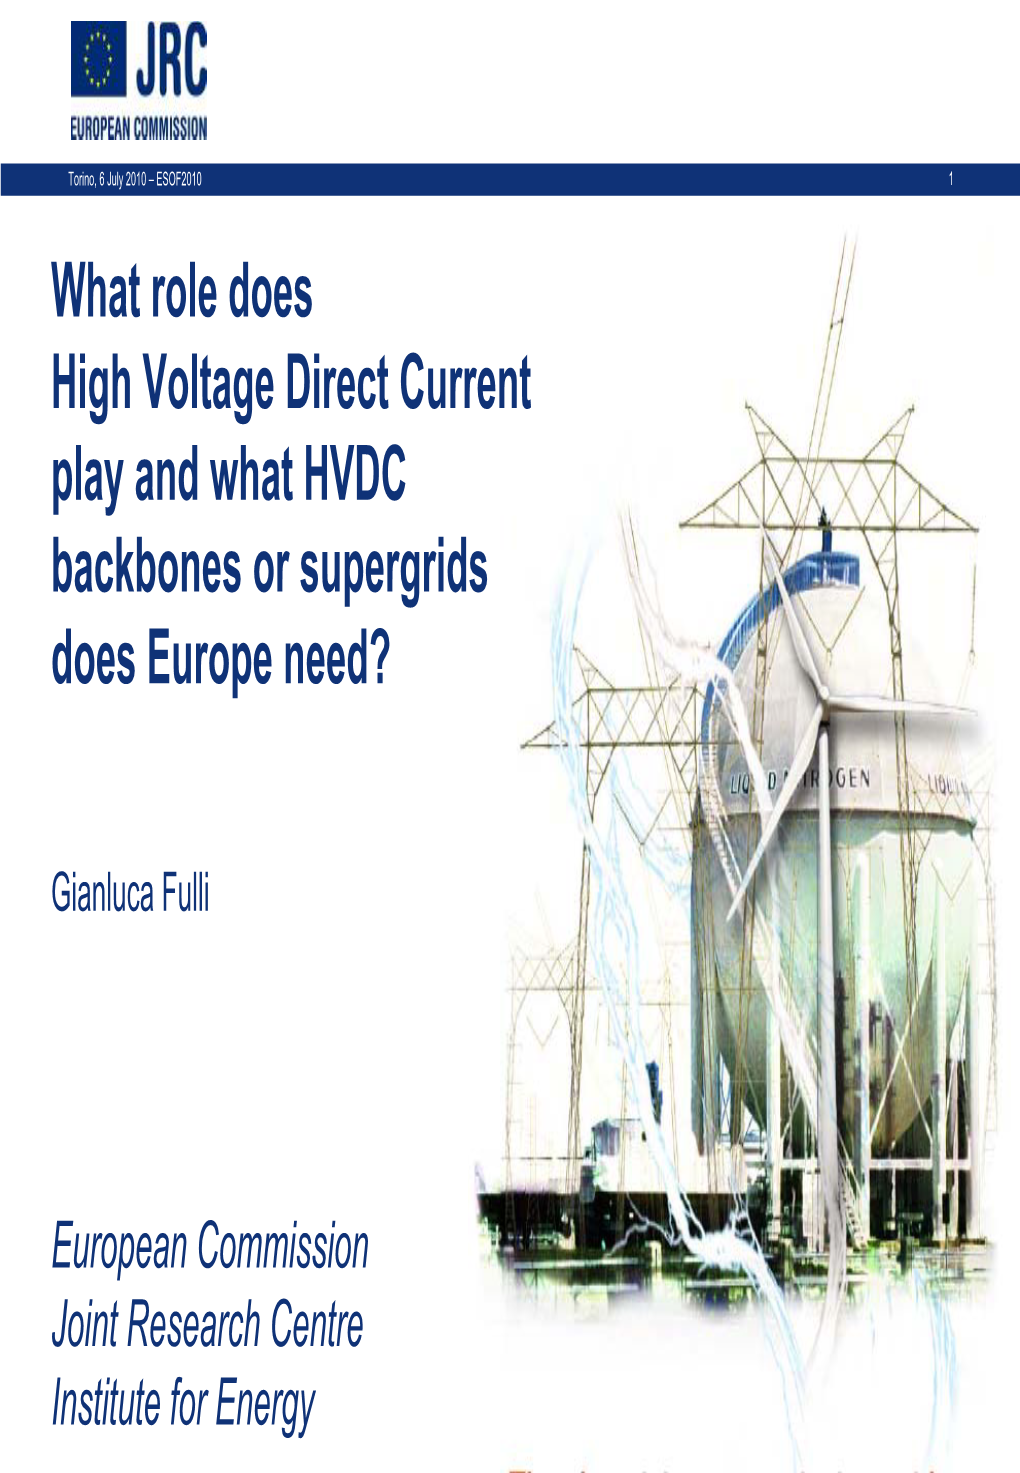 What Role Does High Voltage Direct Current Play and What HVDC Backbones Or Supergrids Does Europe Need?